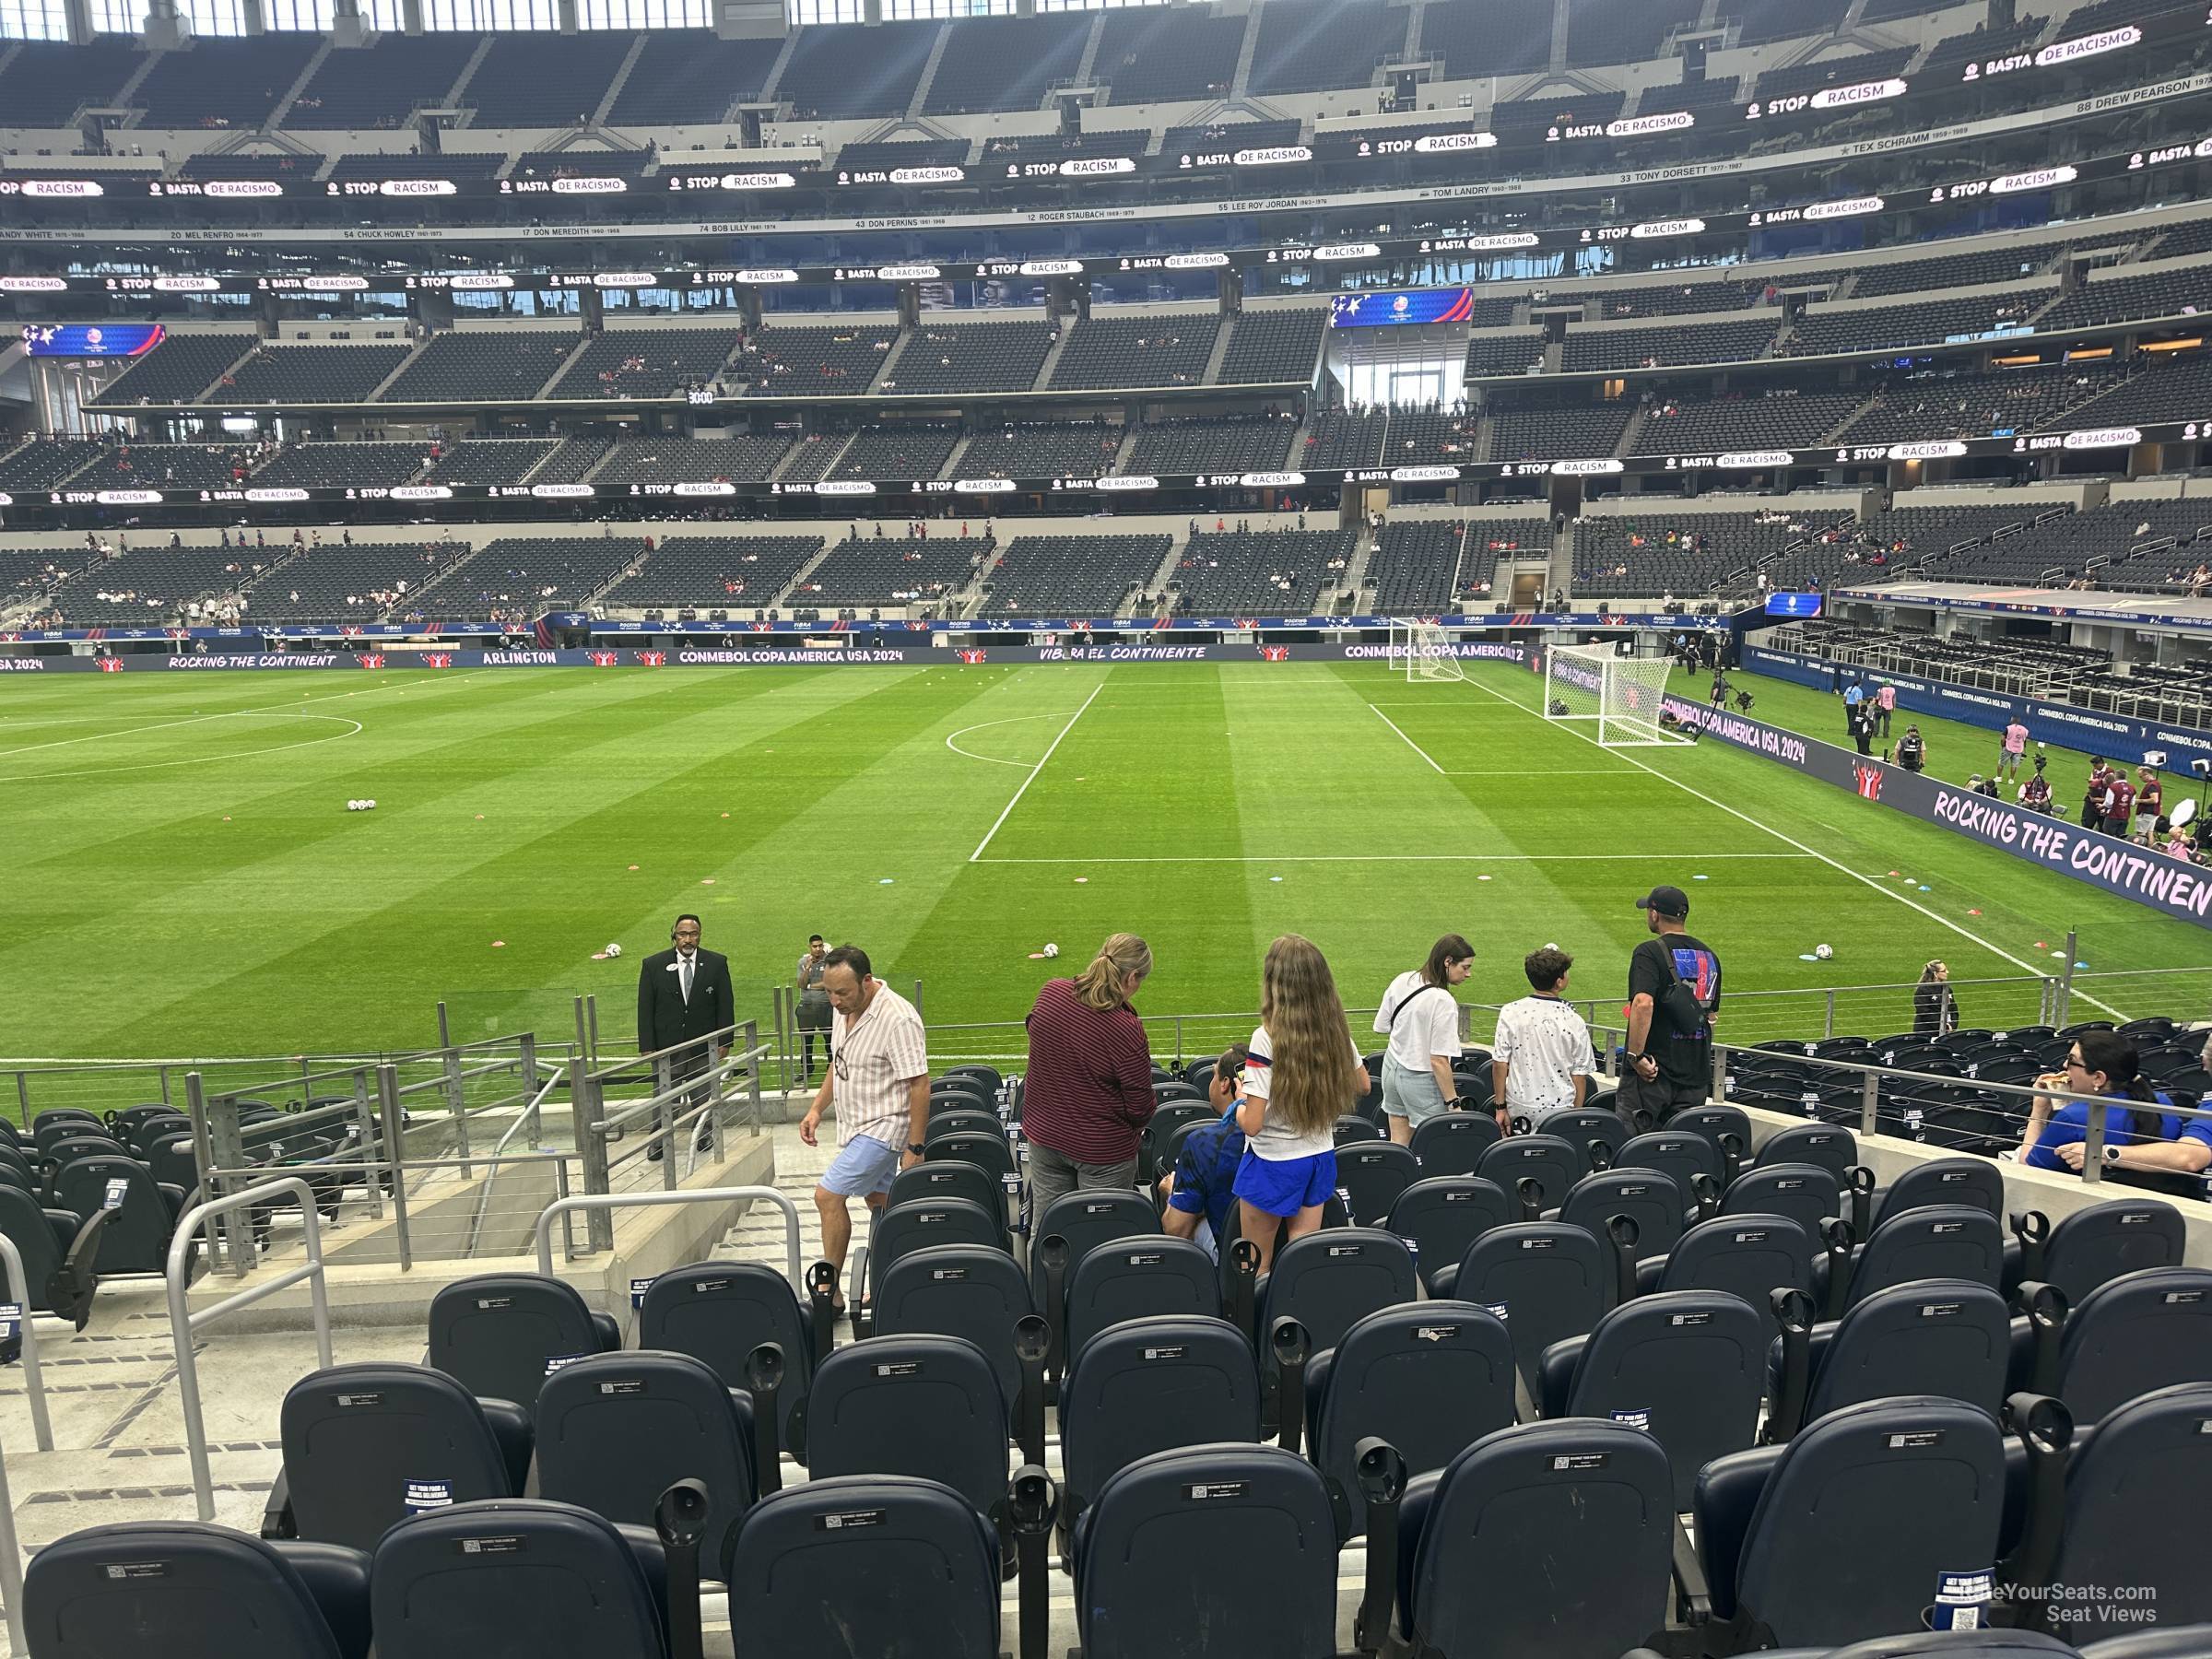 section c132, row 14 seat view  for soccer - at&t stadium (cowboys stadium)